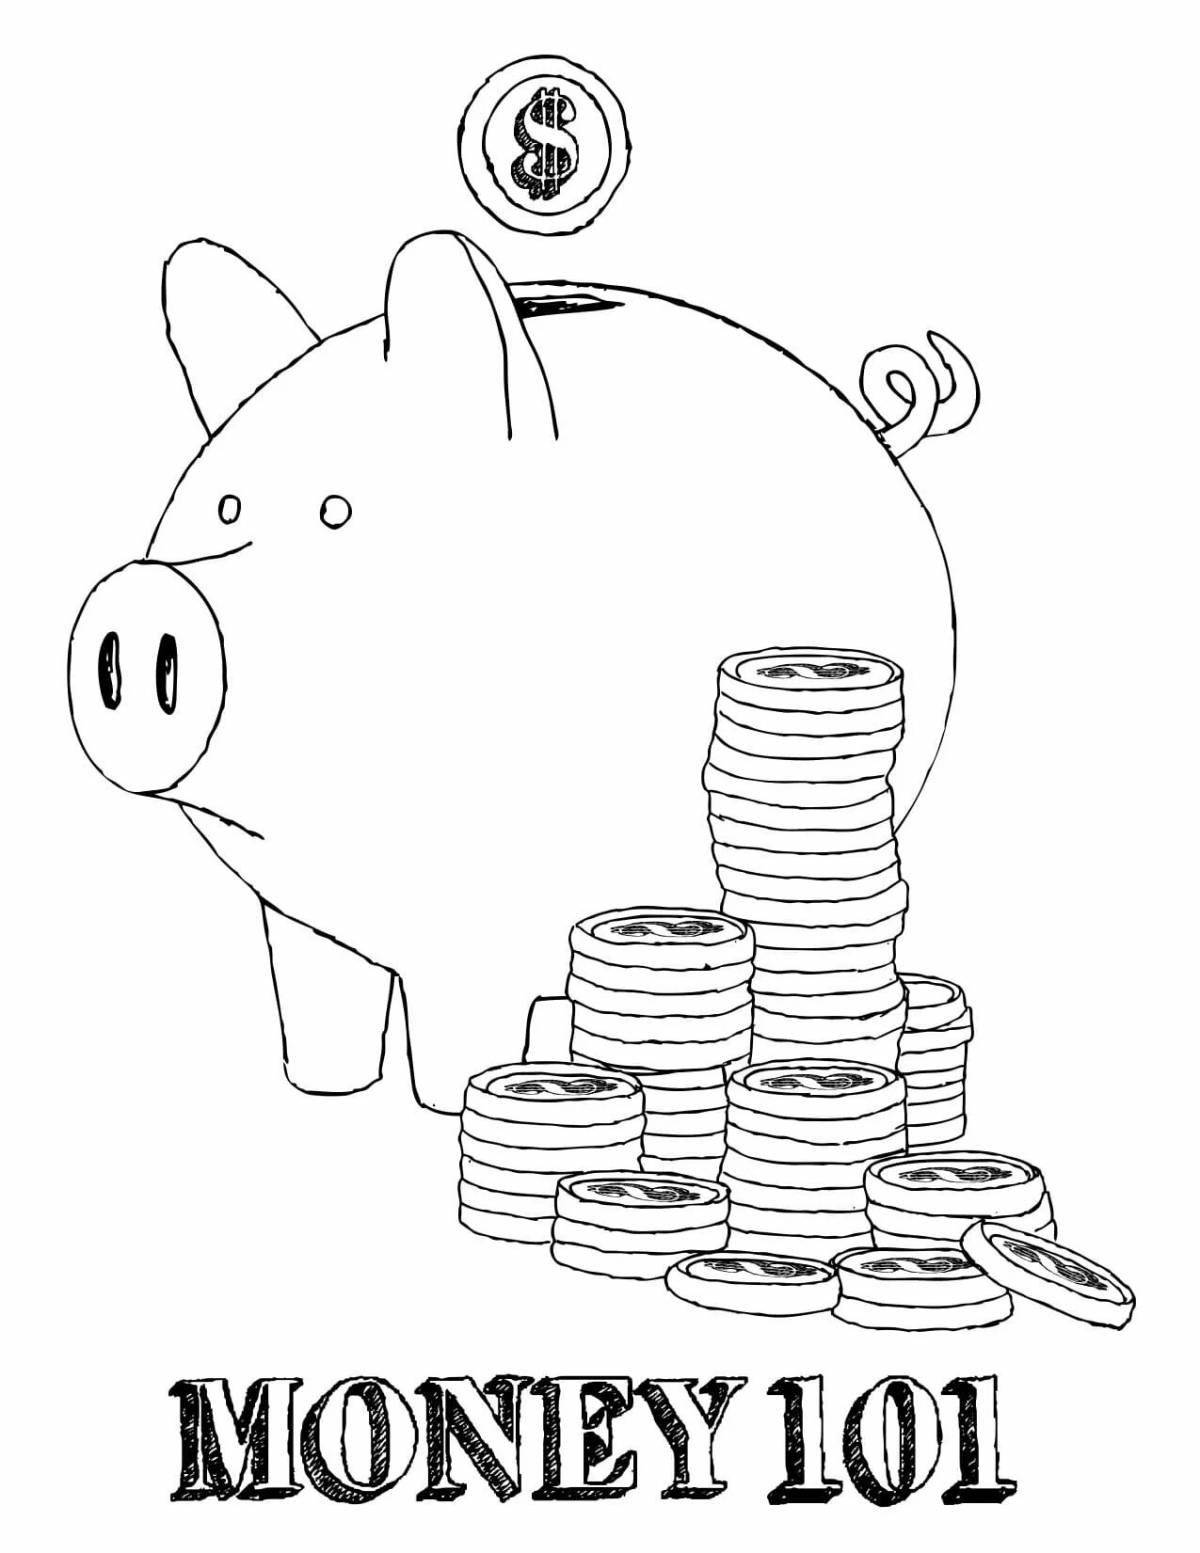 Amazing money ruble coloring pages for the little ones